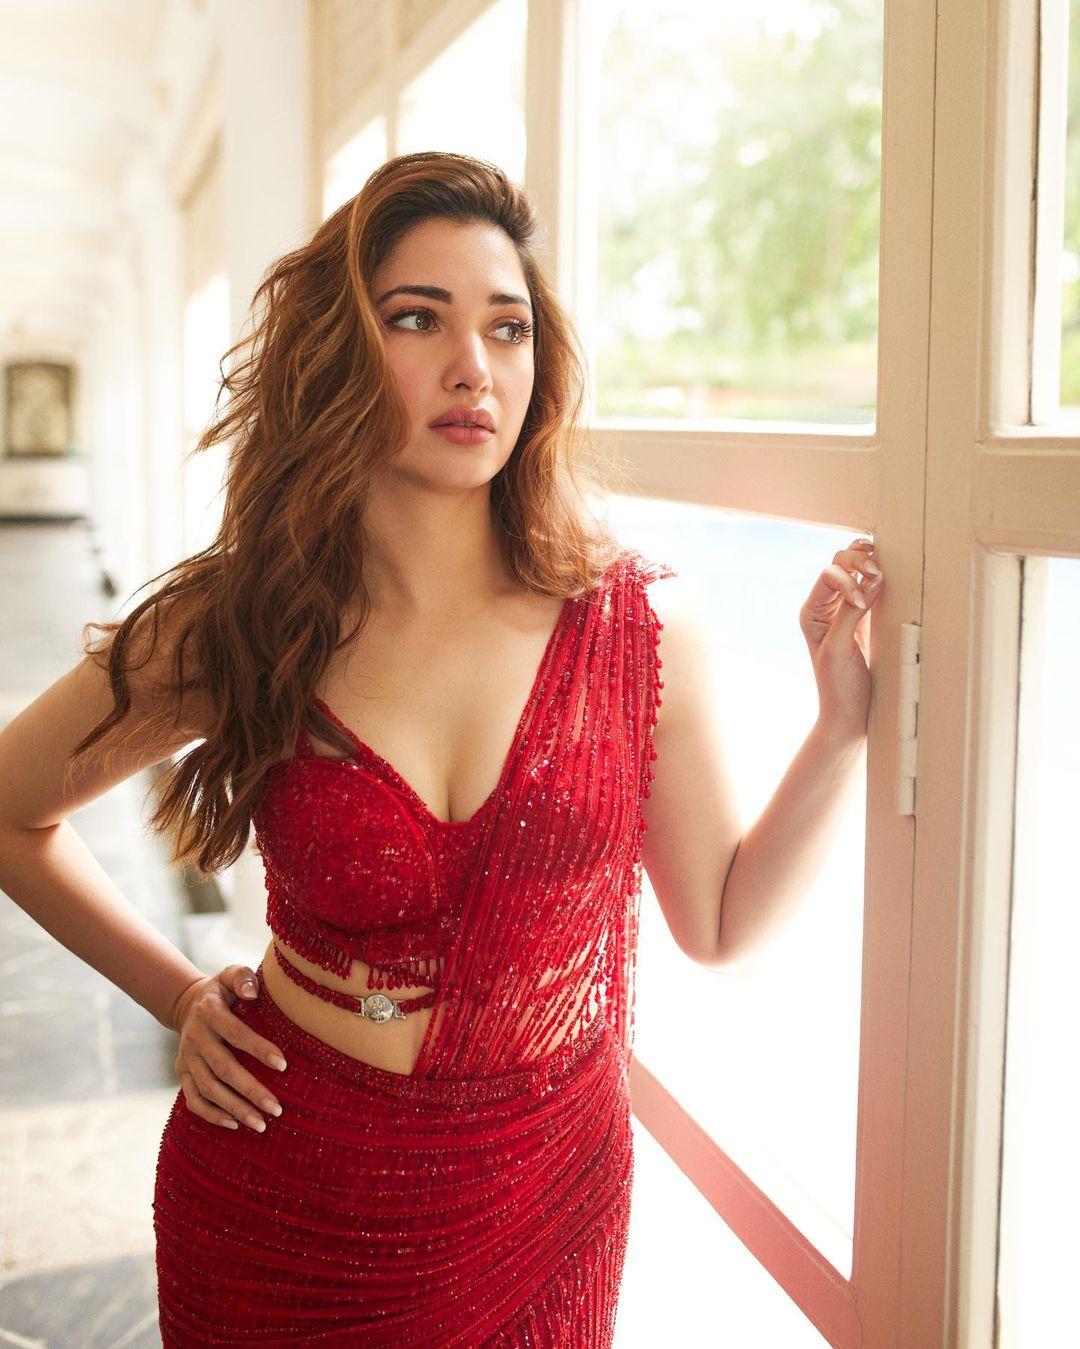 Xxx Sex Videos In Tamanna - Tamannaah Bhatia: These looks of pan-India beauty will make you go WOW!